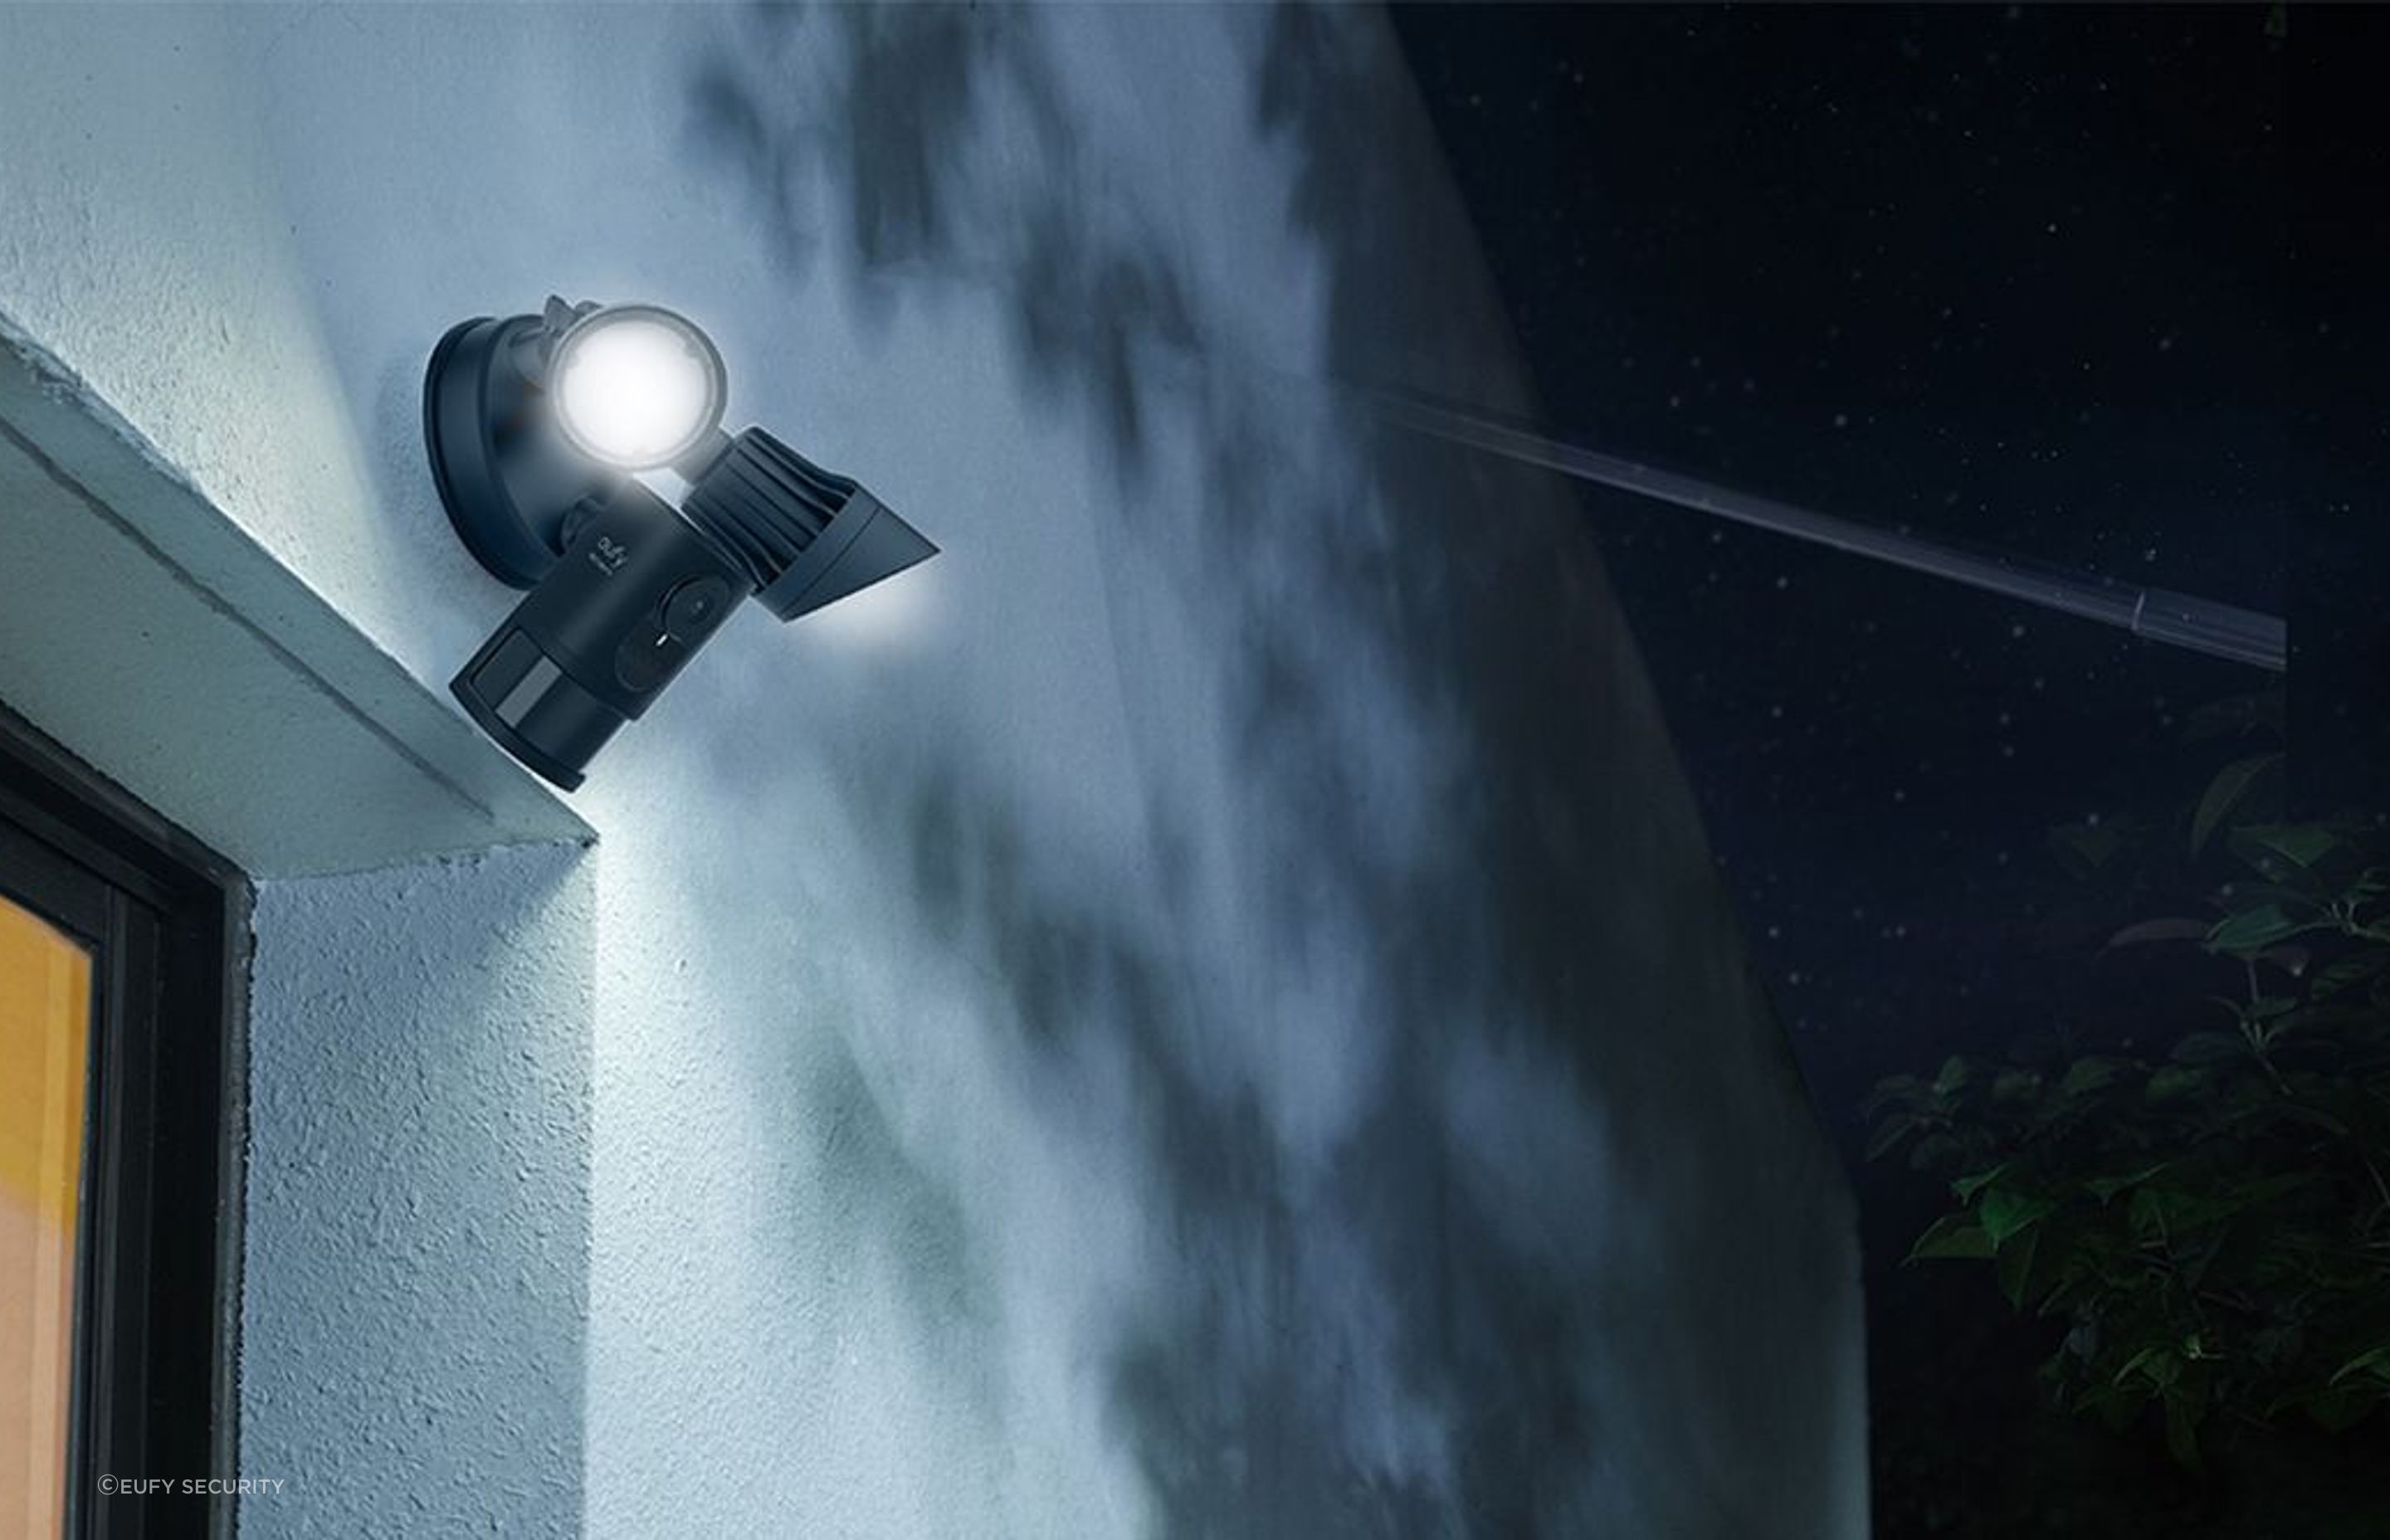 The Eufy Floodlight Cam can live-stream and record in full 2K resolution - ideal for home security